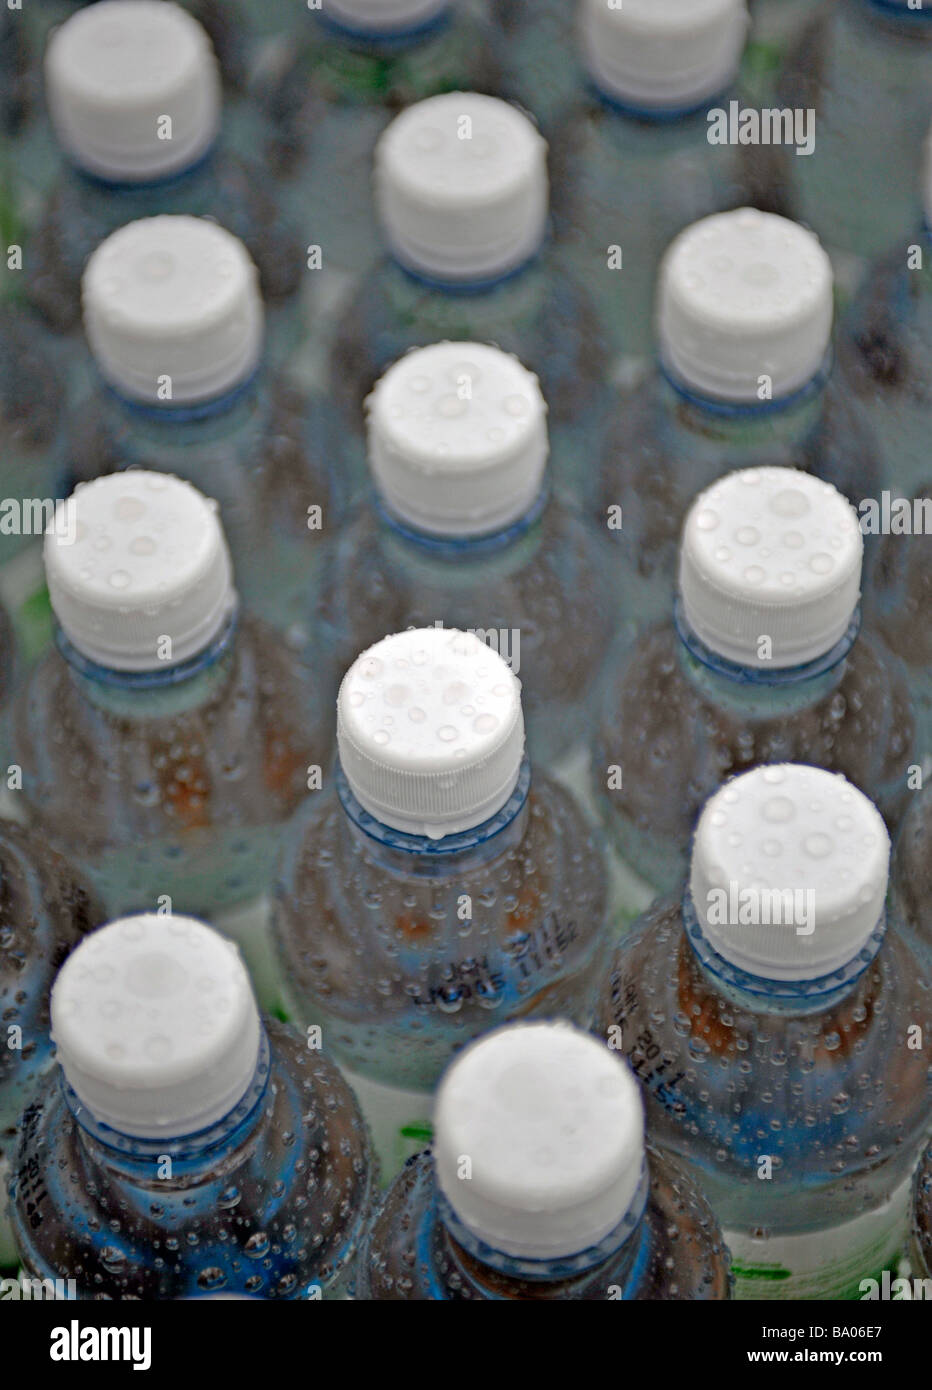 caps on mineral water bottles Stock Photo